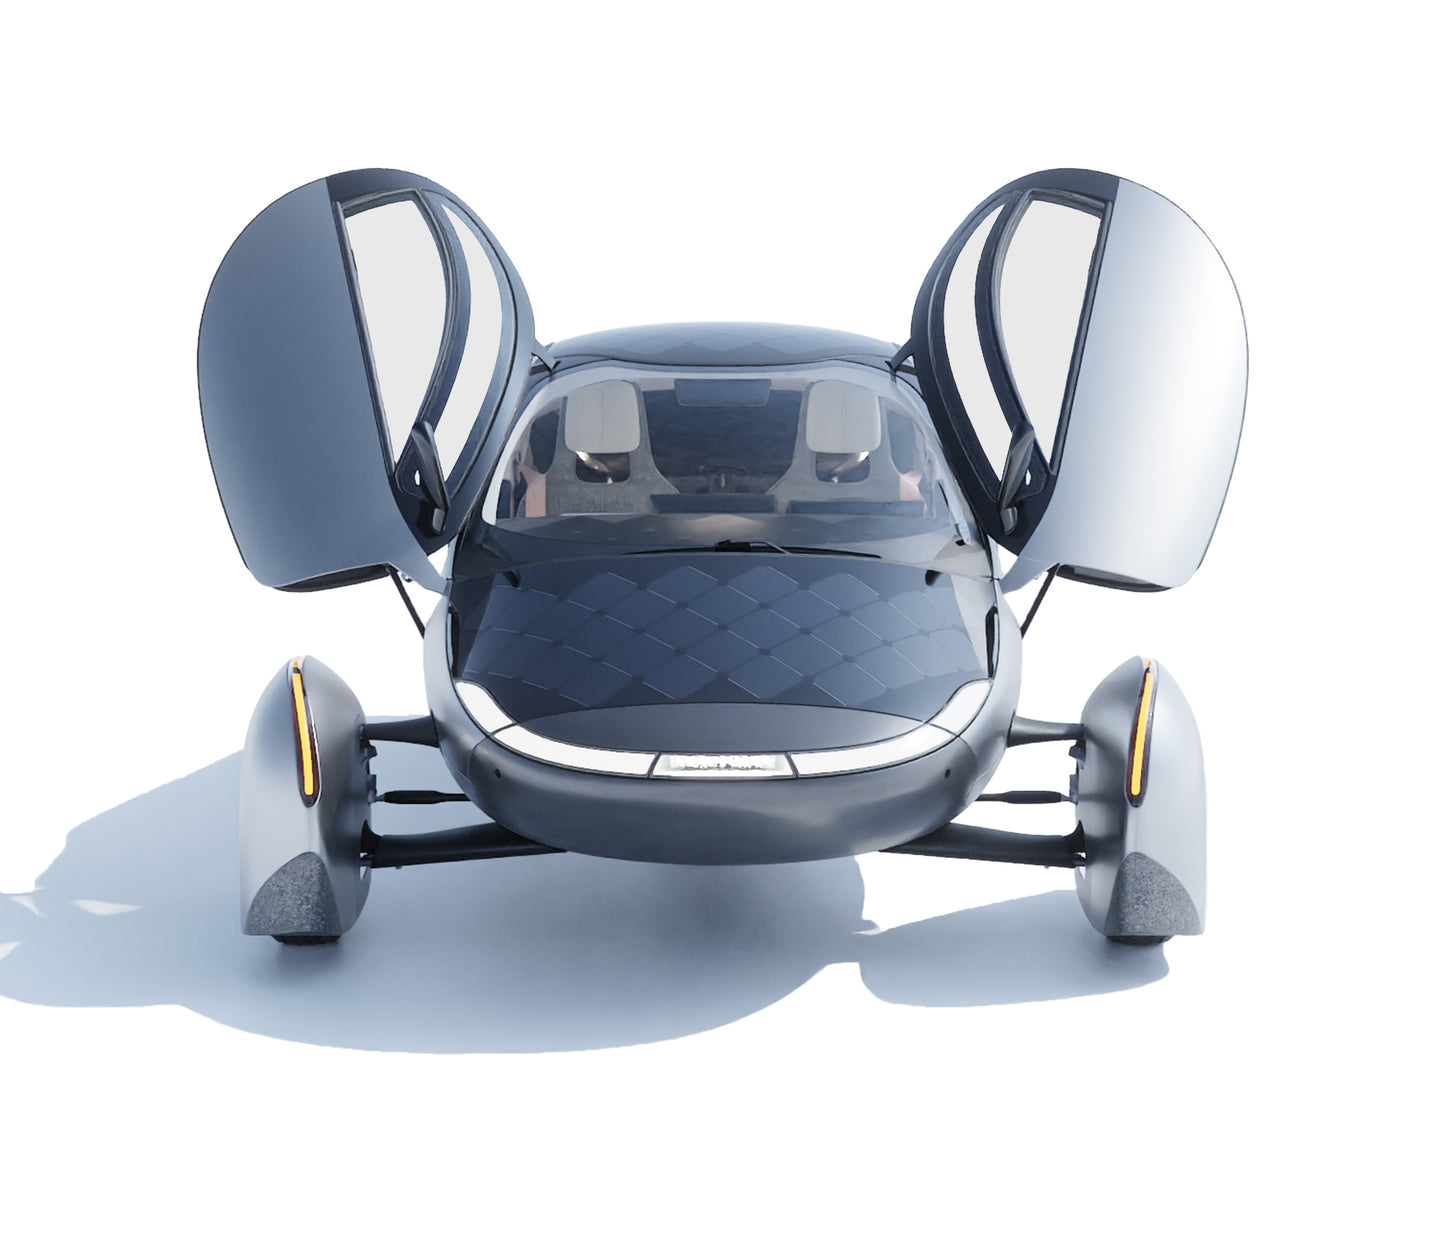 Aptera Micro car-Launch Edition-The car driven by the sun .  Pre Order NOW APT001